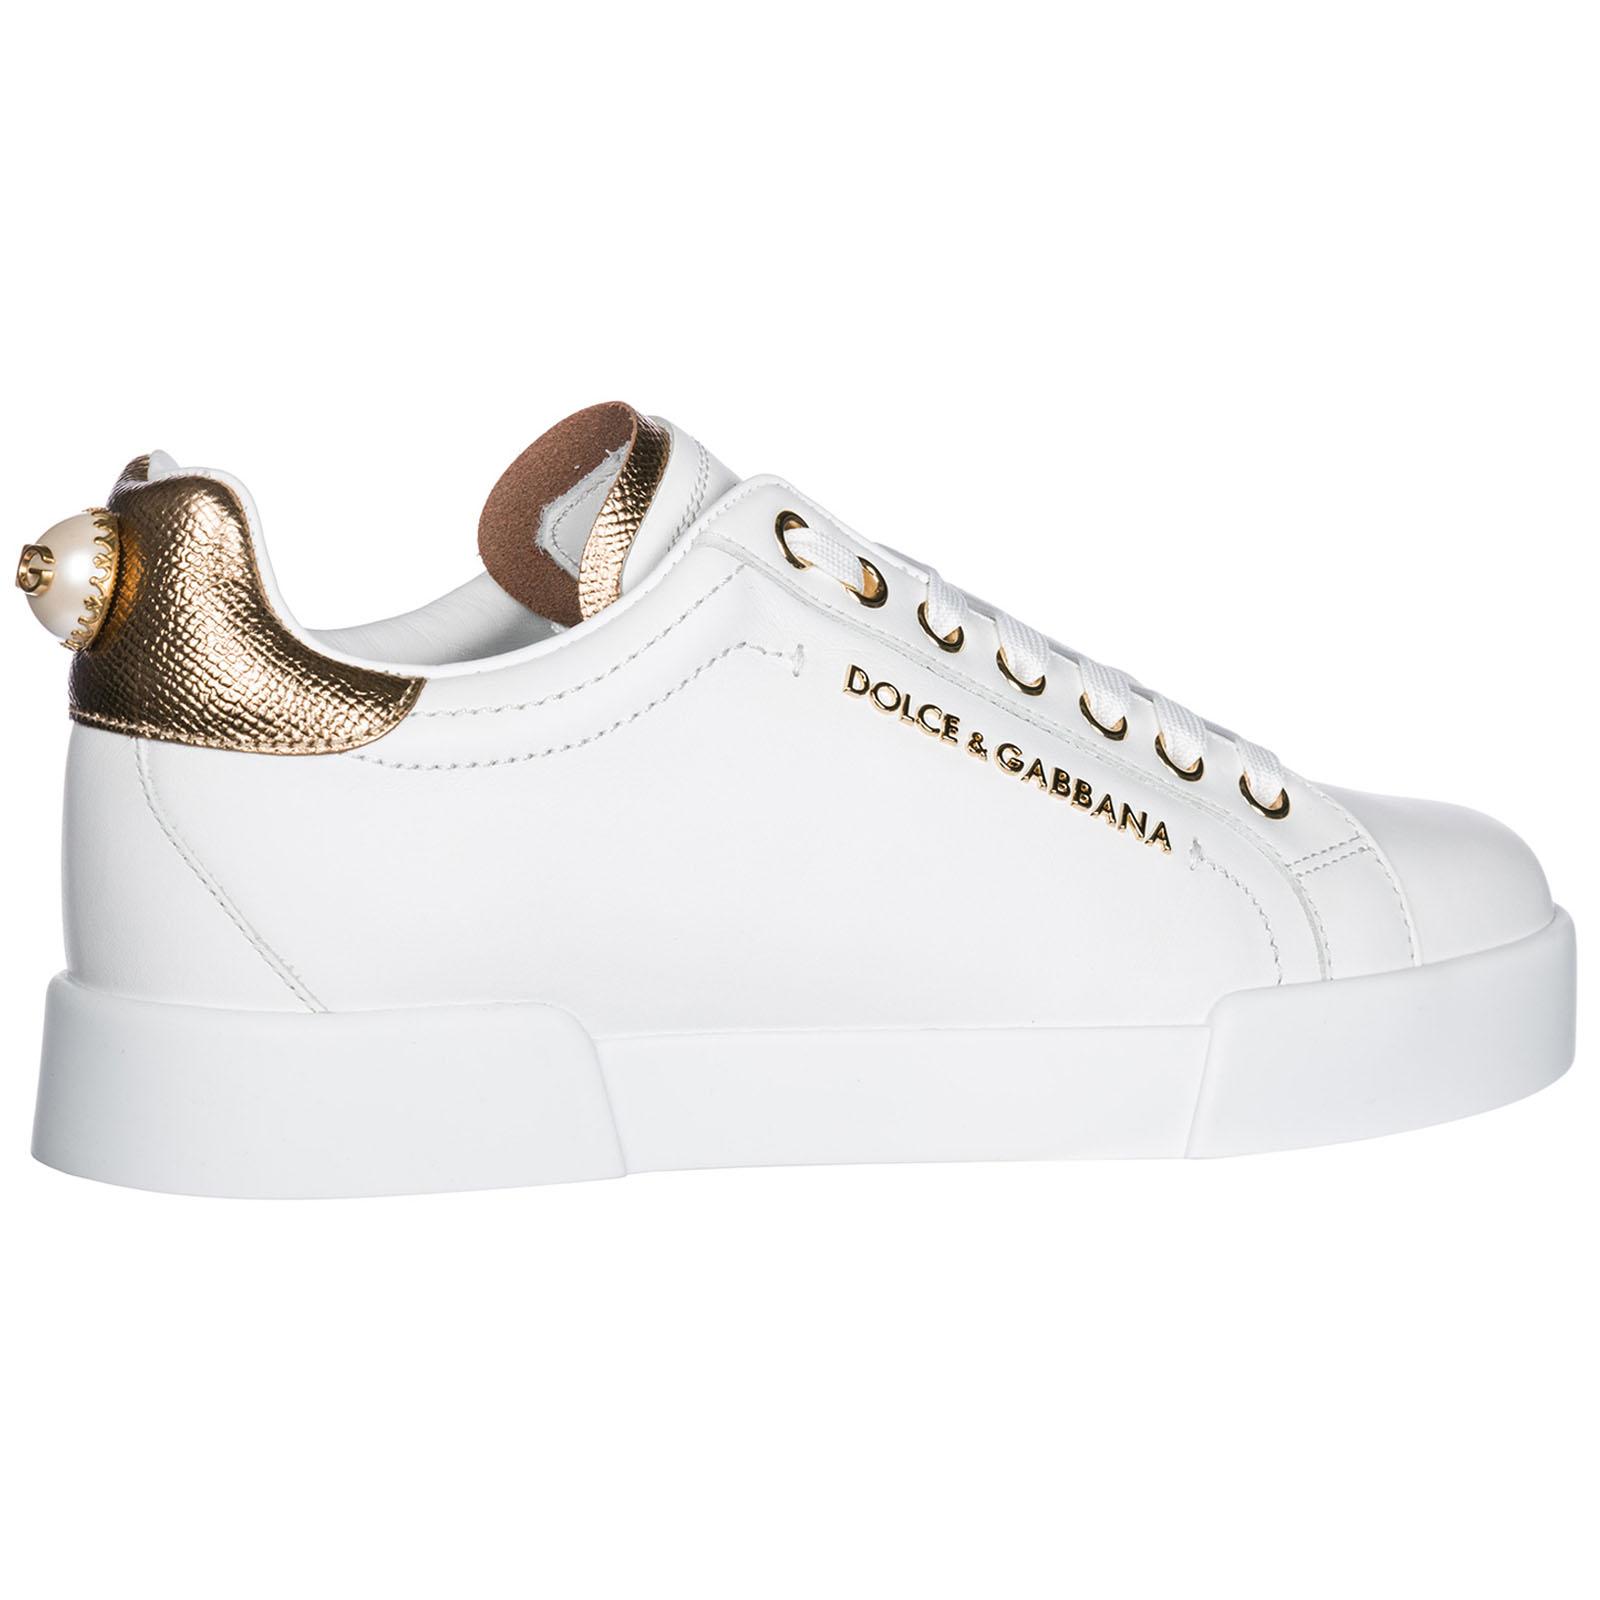 Dolce & Gabbana Women's Shoes Leather Trainers Sneakers Portofino in ...